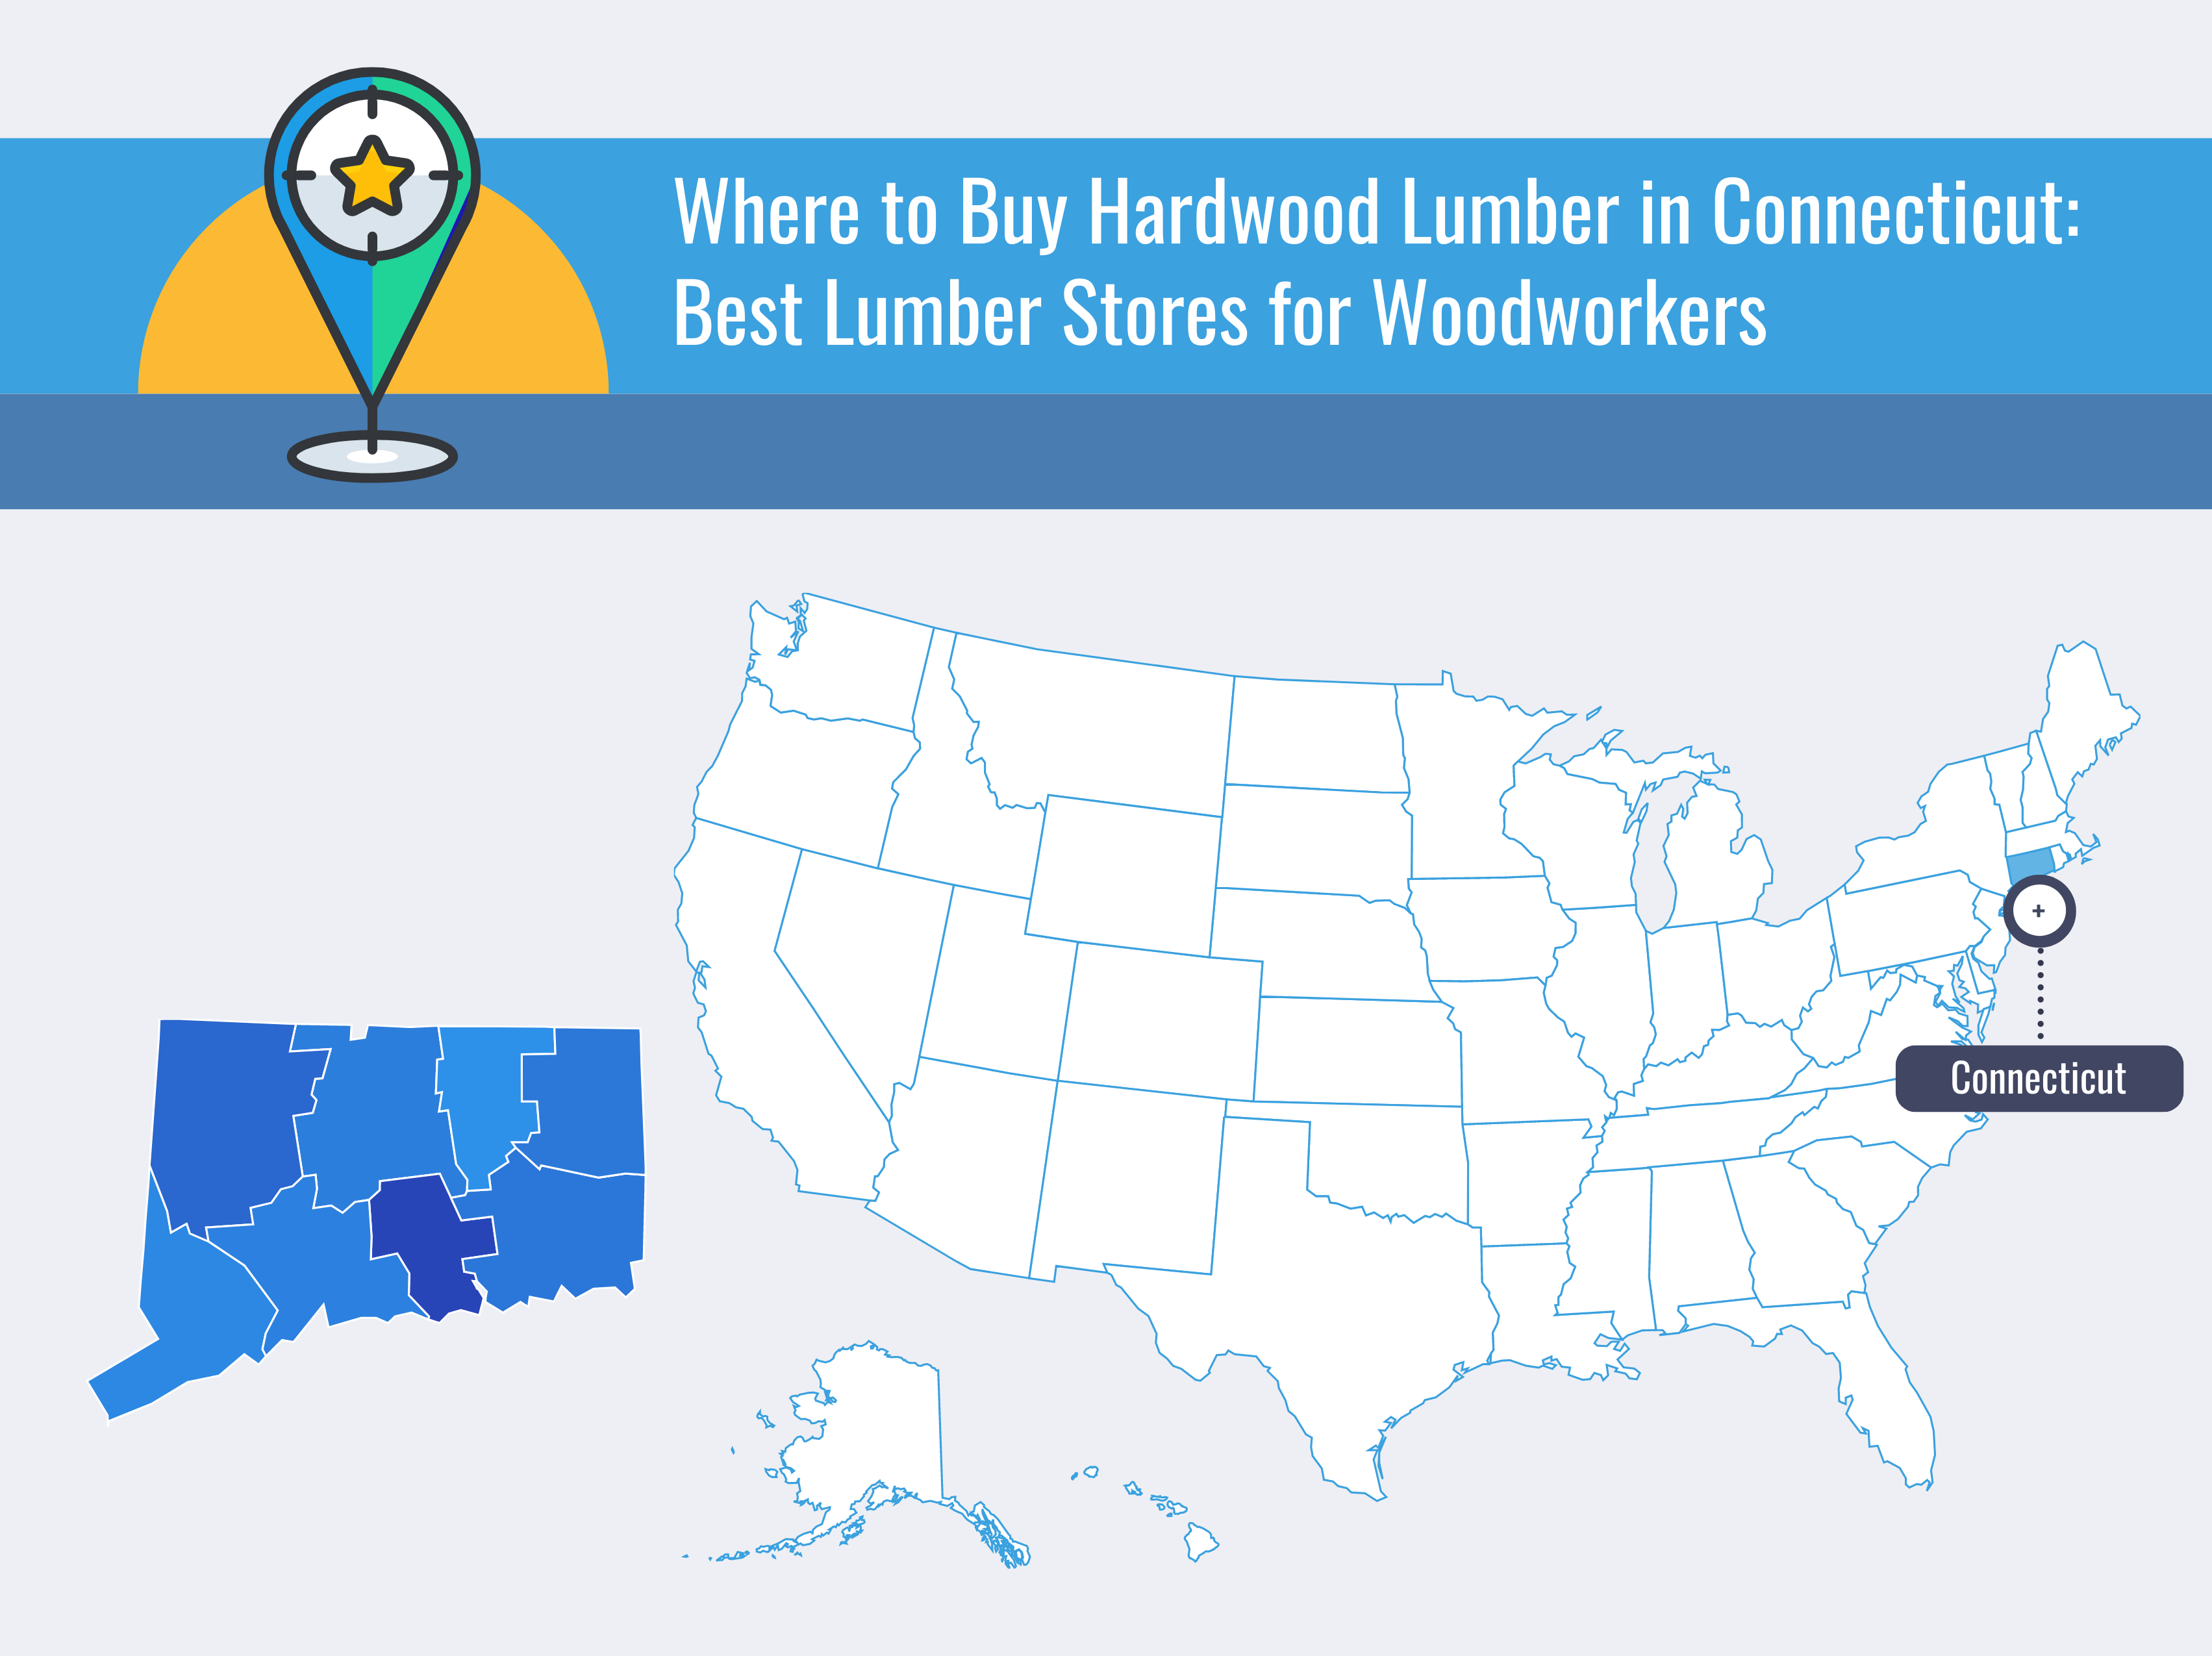 Where to Buy Hardwood Lumber in Connecticut